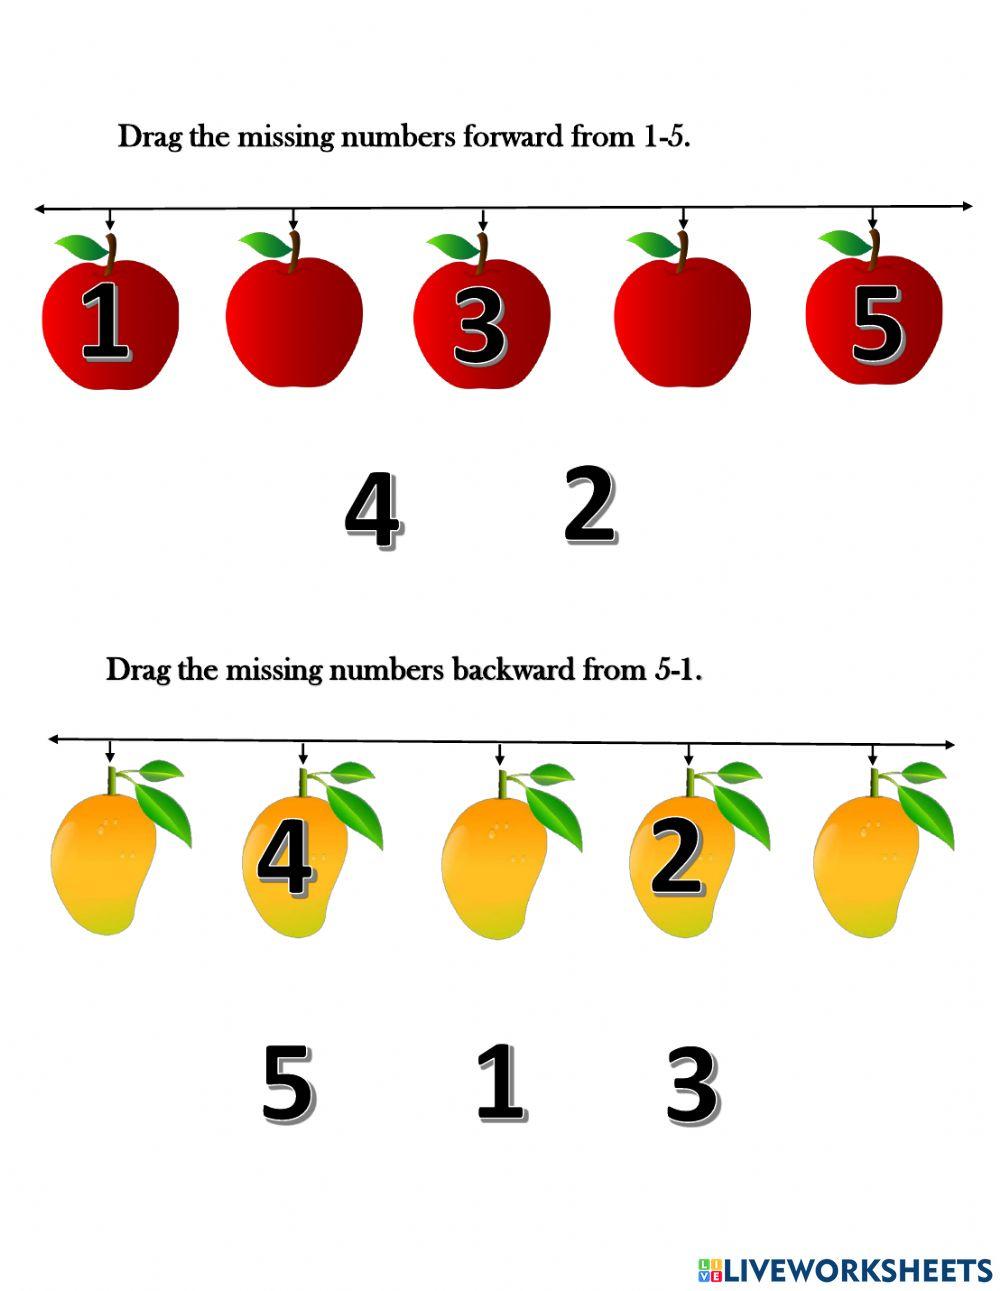 Number lines